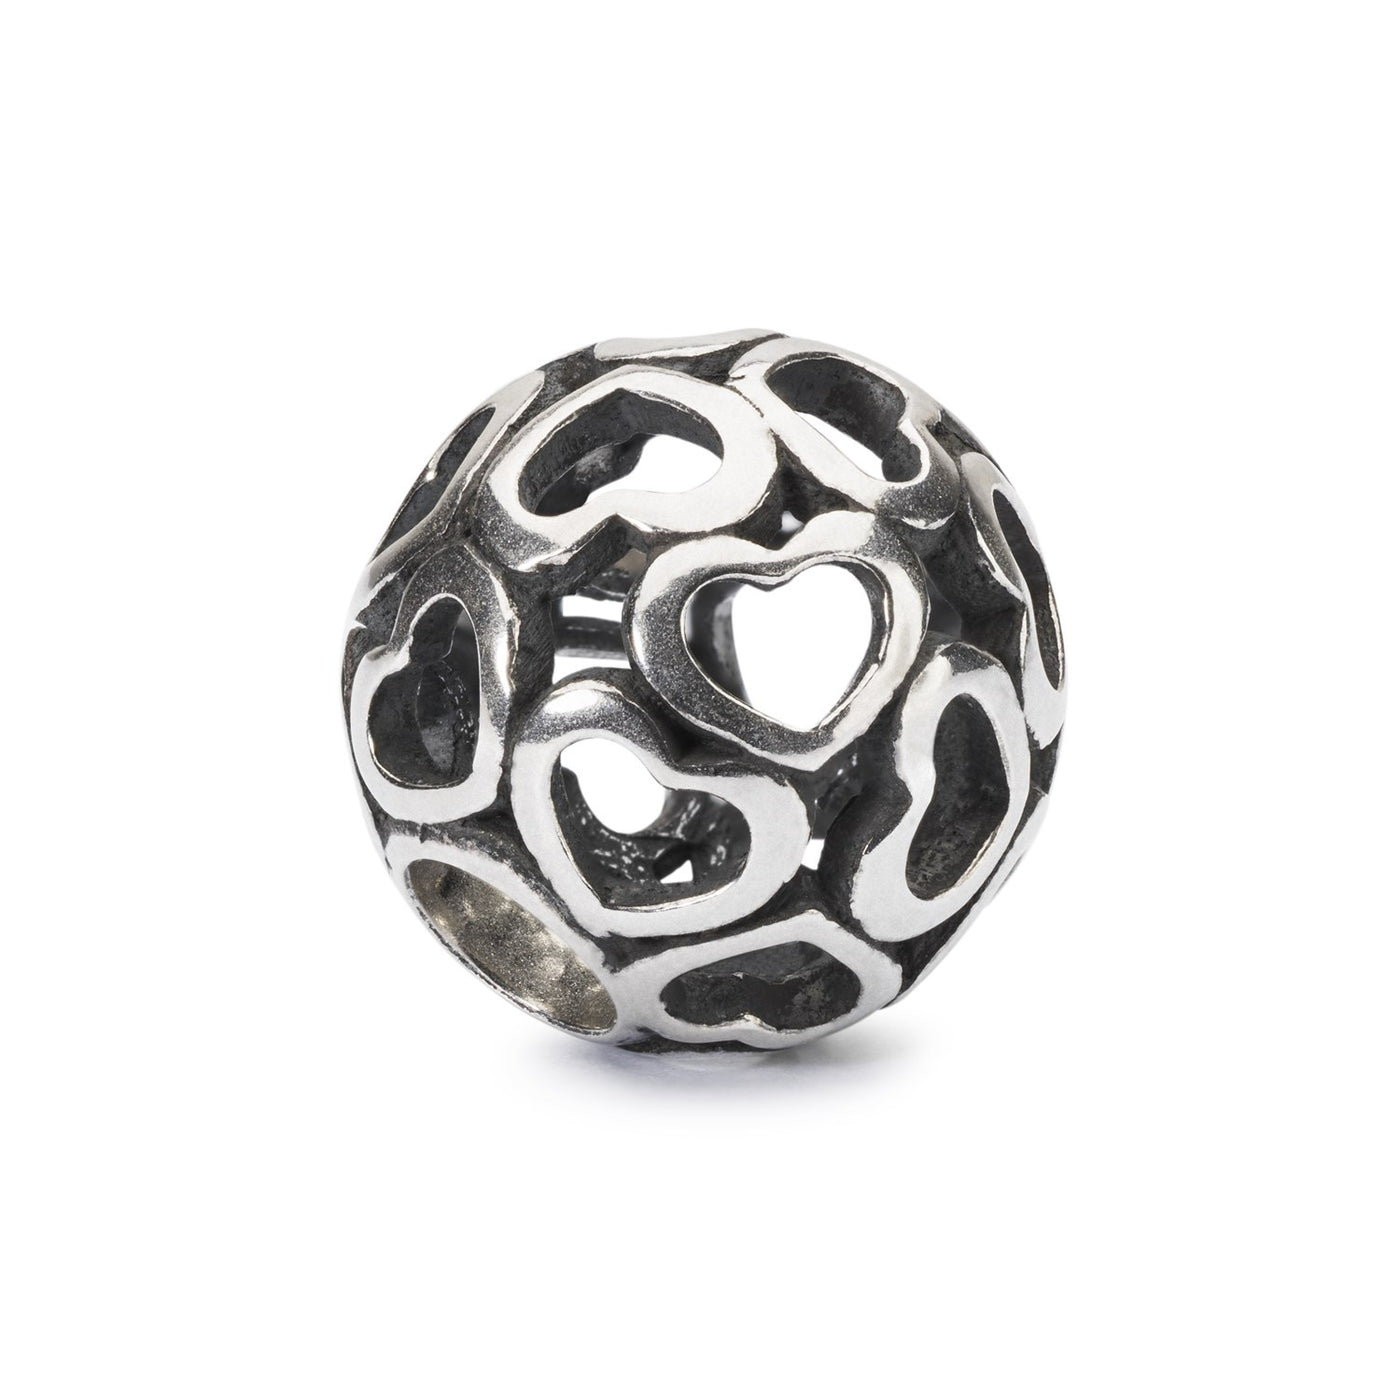 Blanket of Love - a sterling silver bead with a round shape and textured design of multiple hearts all over resembling a cozy blanket.